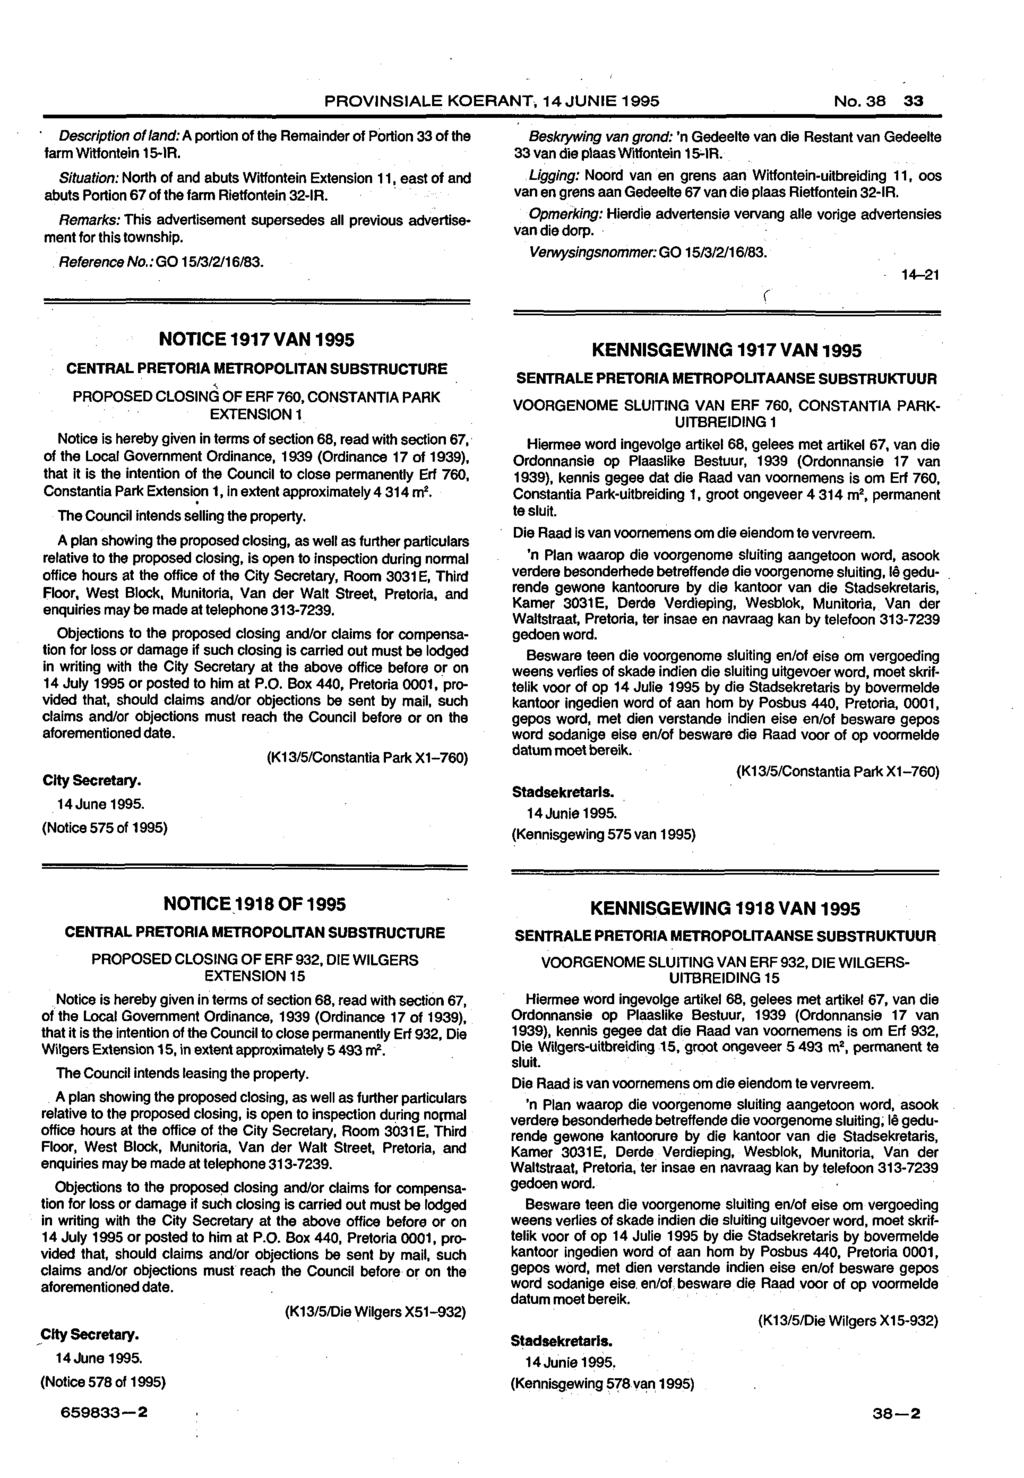 PROVINSIALE KOERANT, 14JUNIE 1995 No. 33 Description of land: A portion of the Remainder of Portion 33 of the farm Witlonteln 1 5-IR.